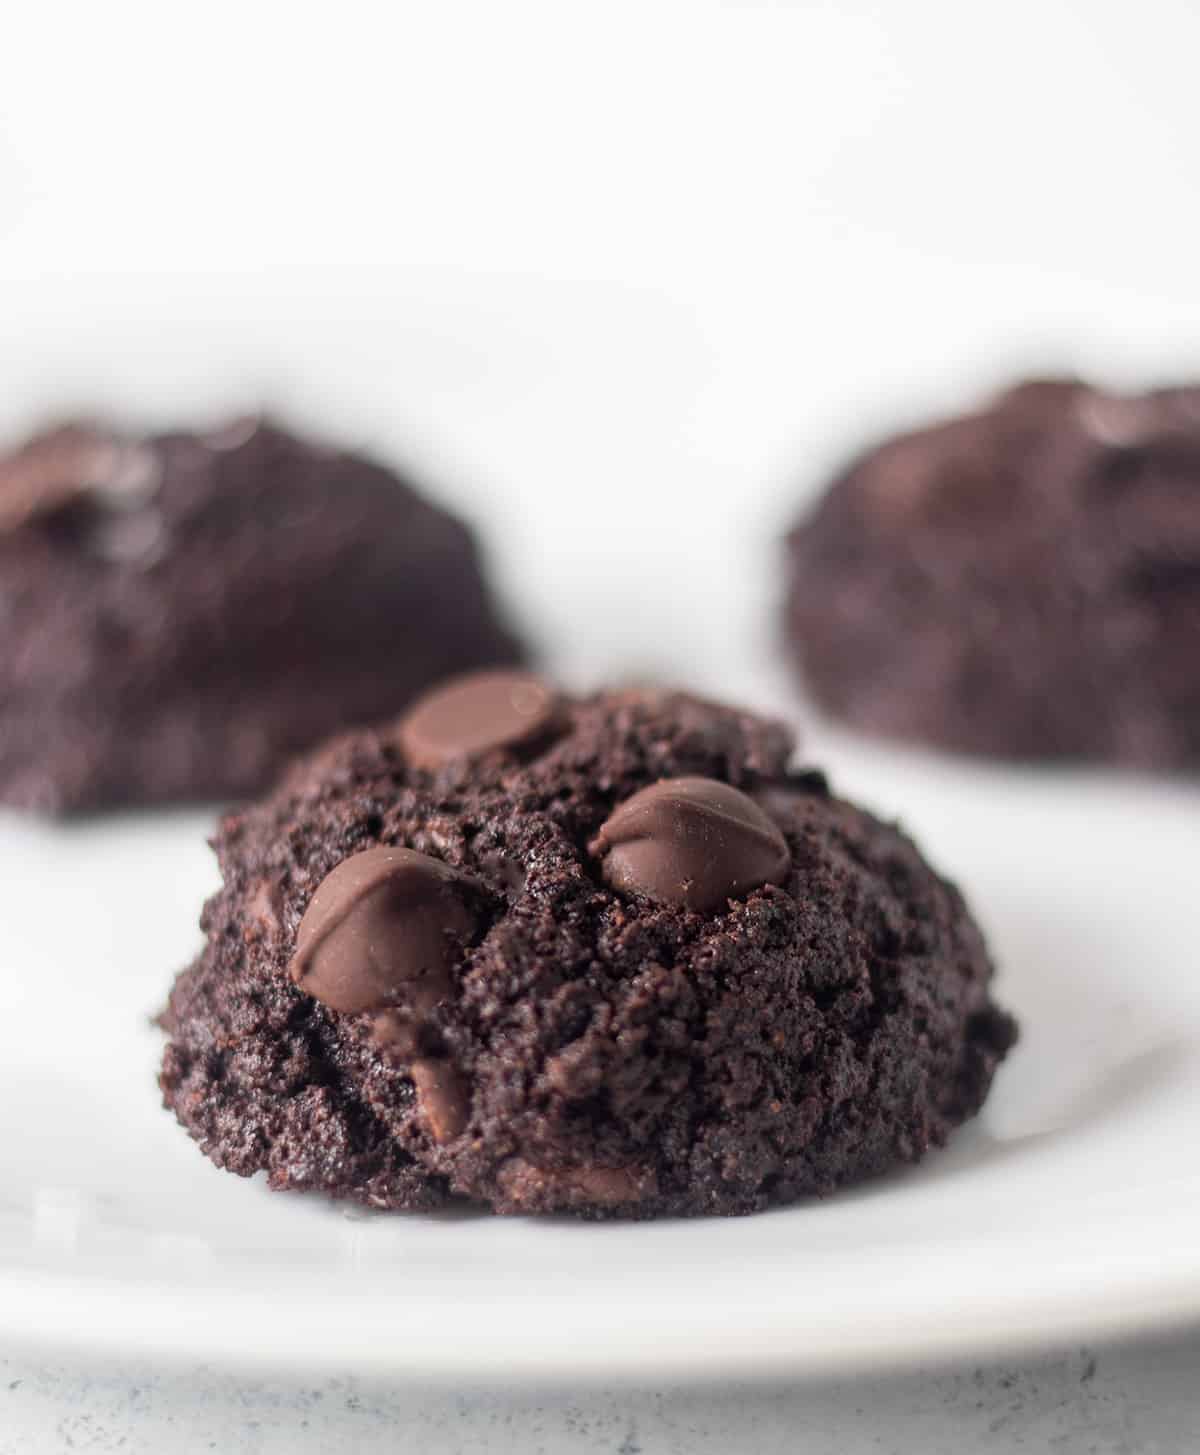 Chocolate coconut flour cookies recipe with cookies on a white plate that are topped with extra chocolate chips.